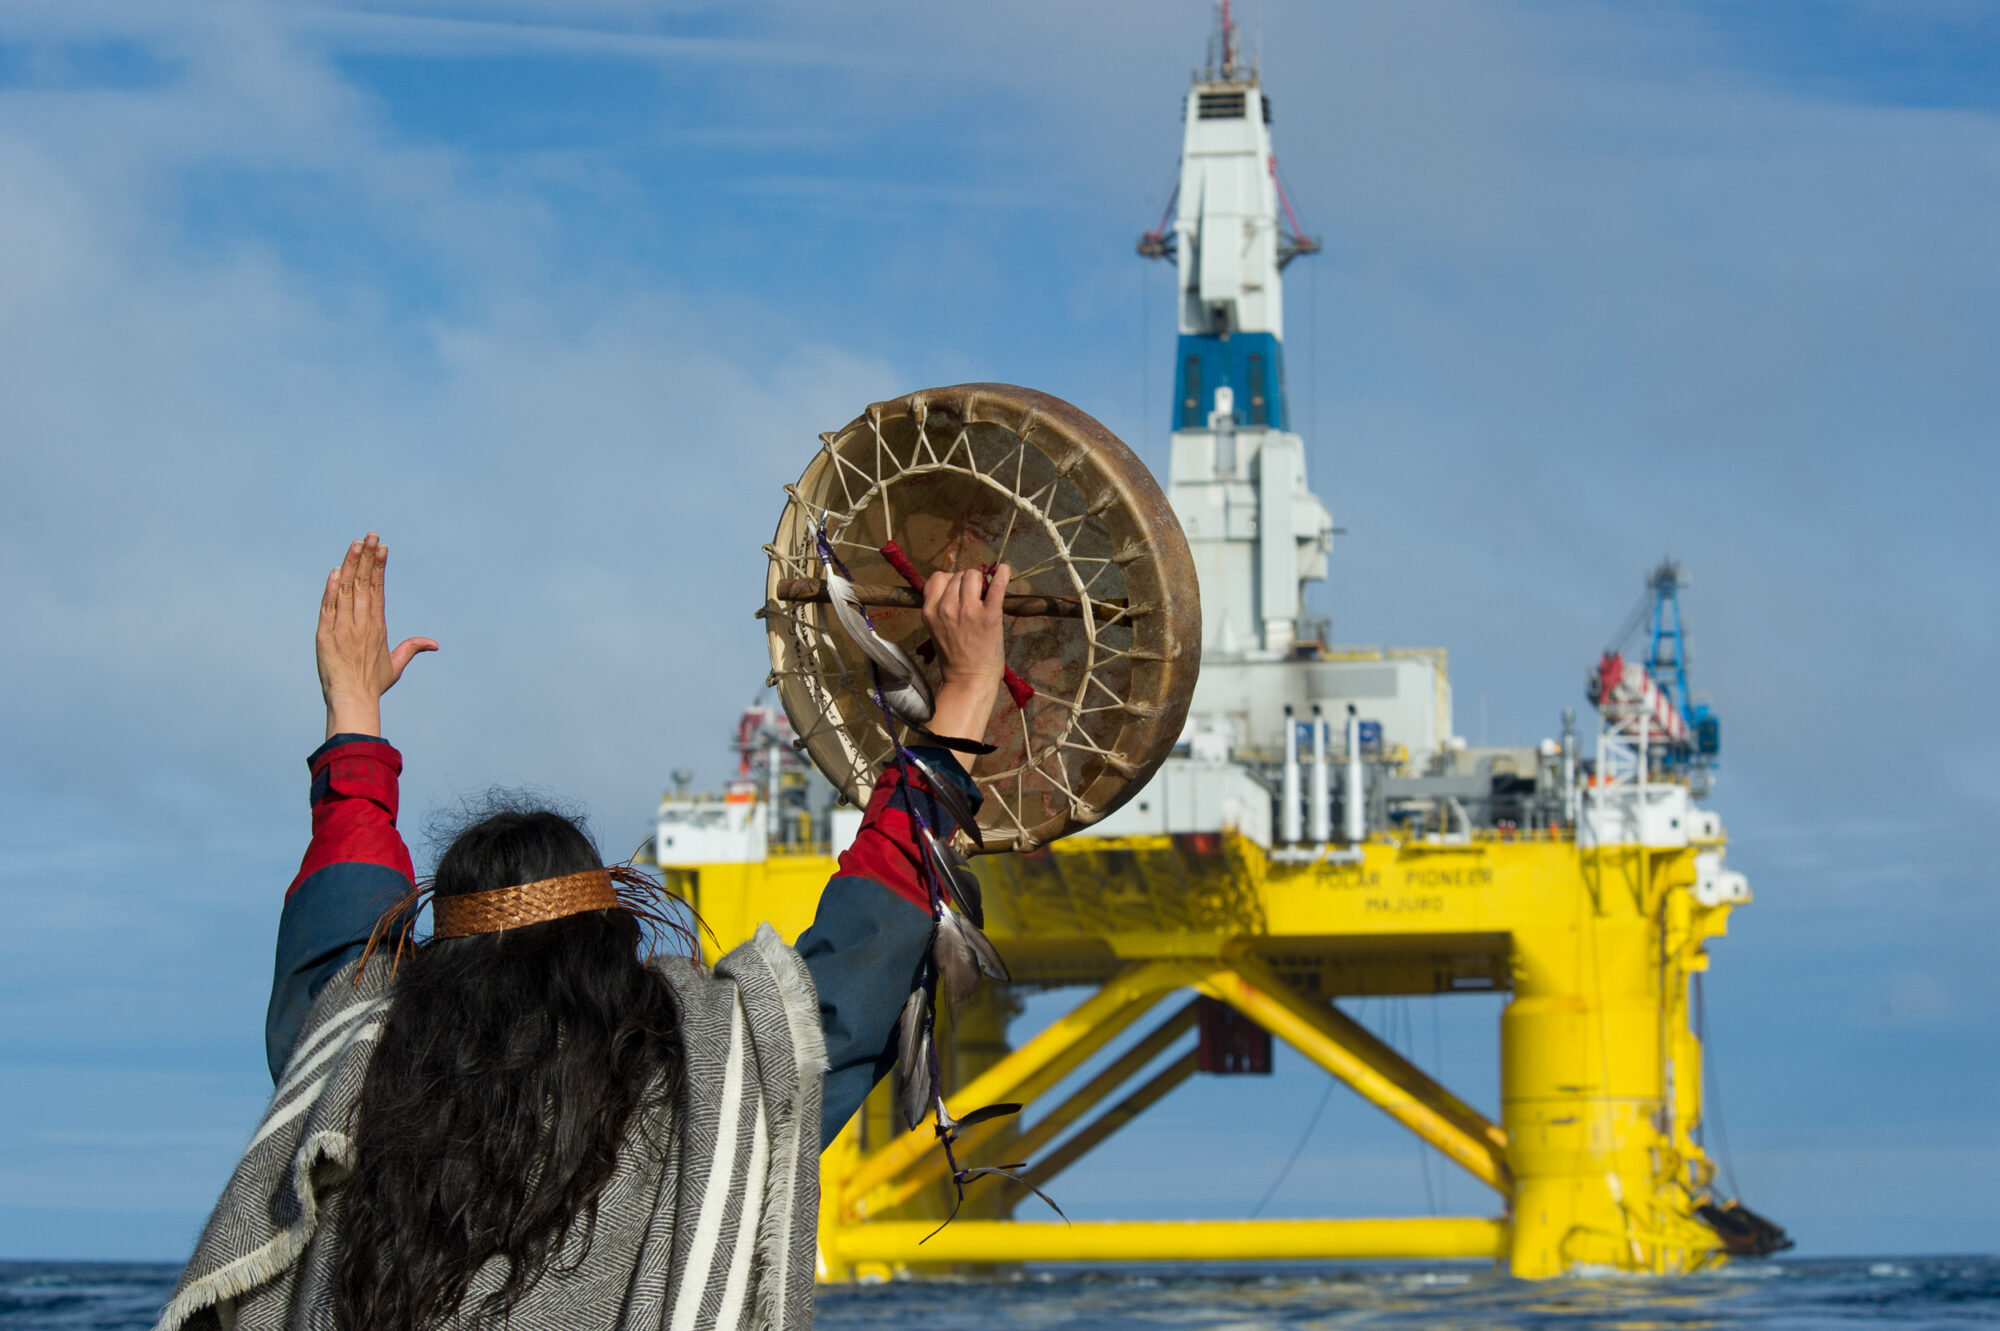 A person in traditional Indigenous Musqueam dress defiantly raises their hands towards a floating oil platform close to the shore. In one hand they're holding a drum.